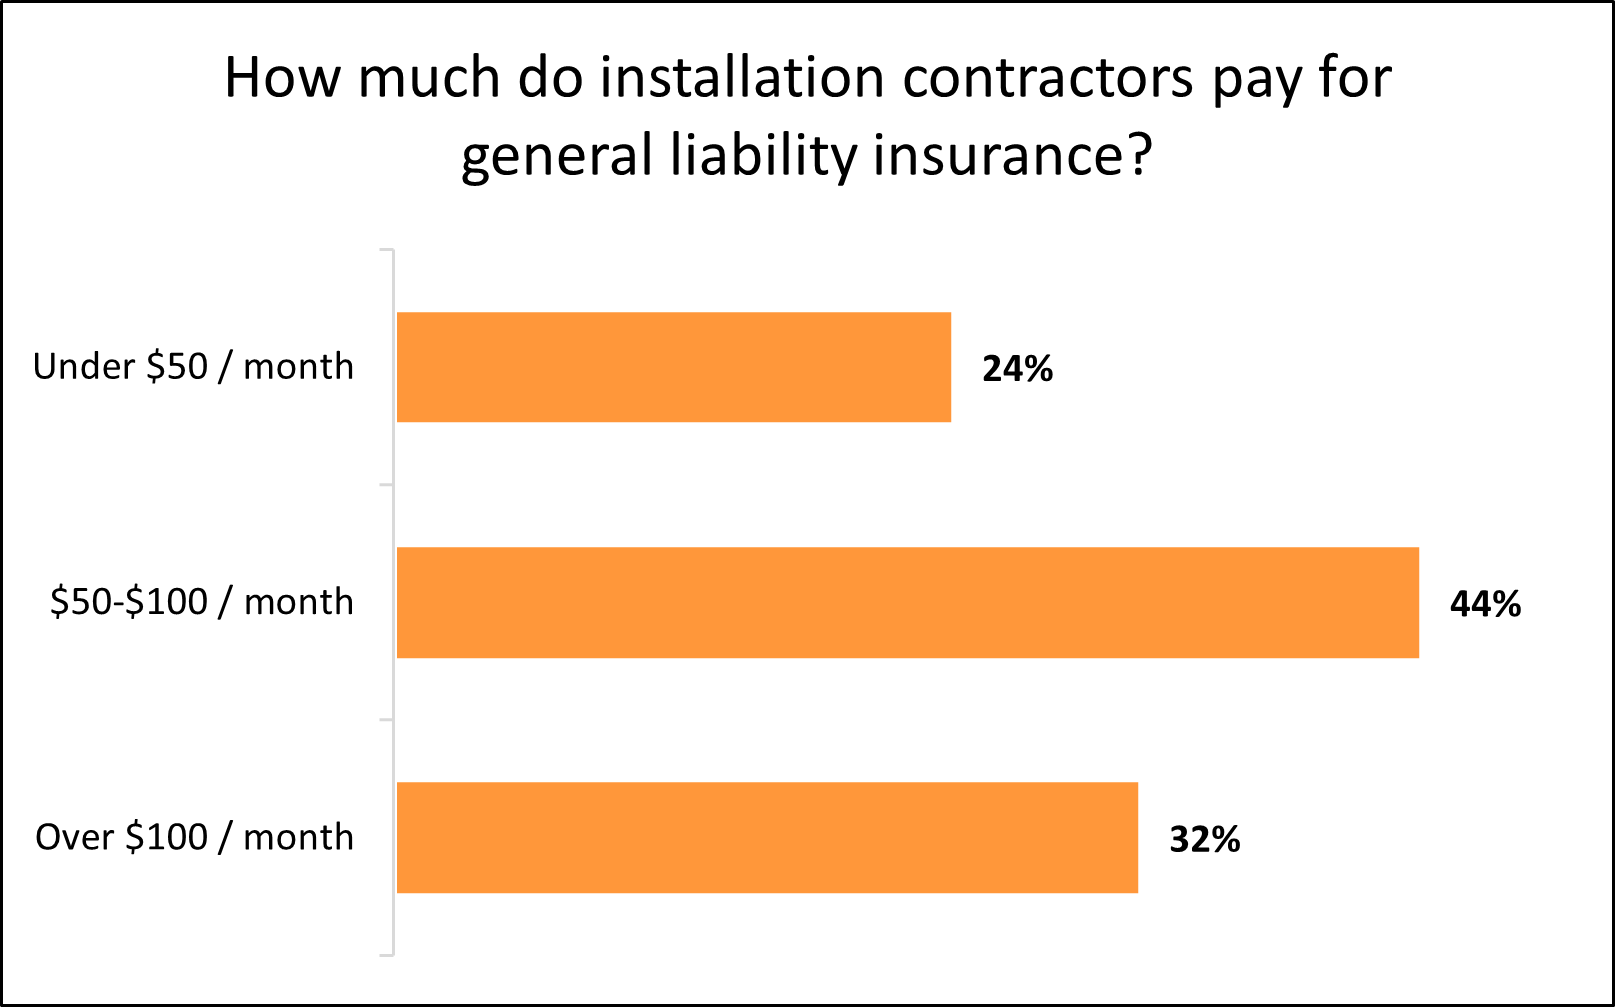 Average monthly cost of general liability insurance for installation businesses.